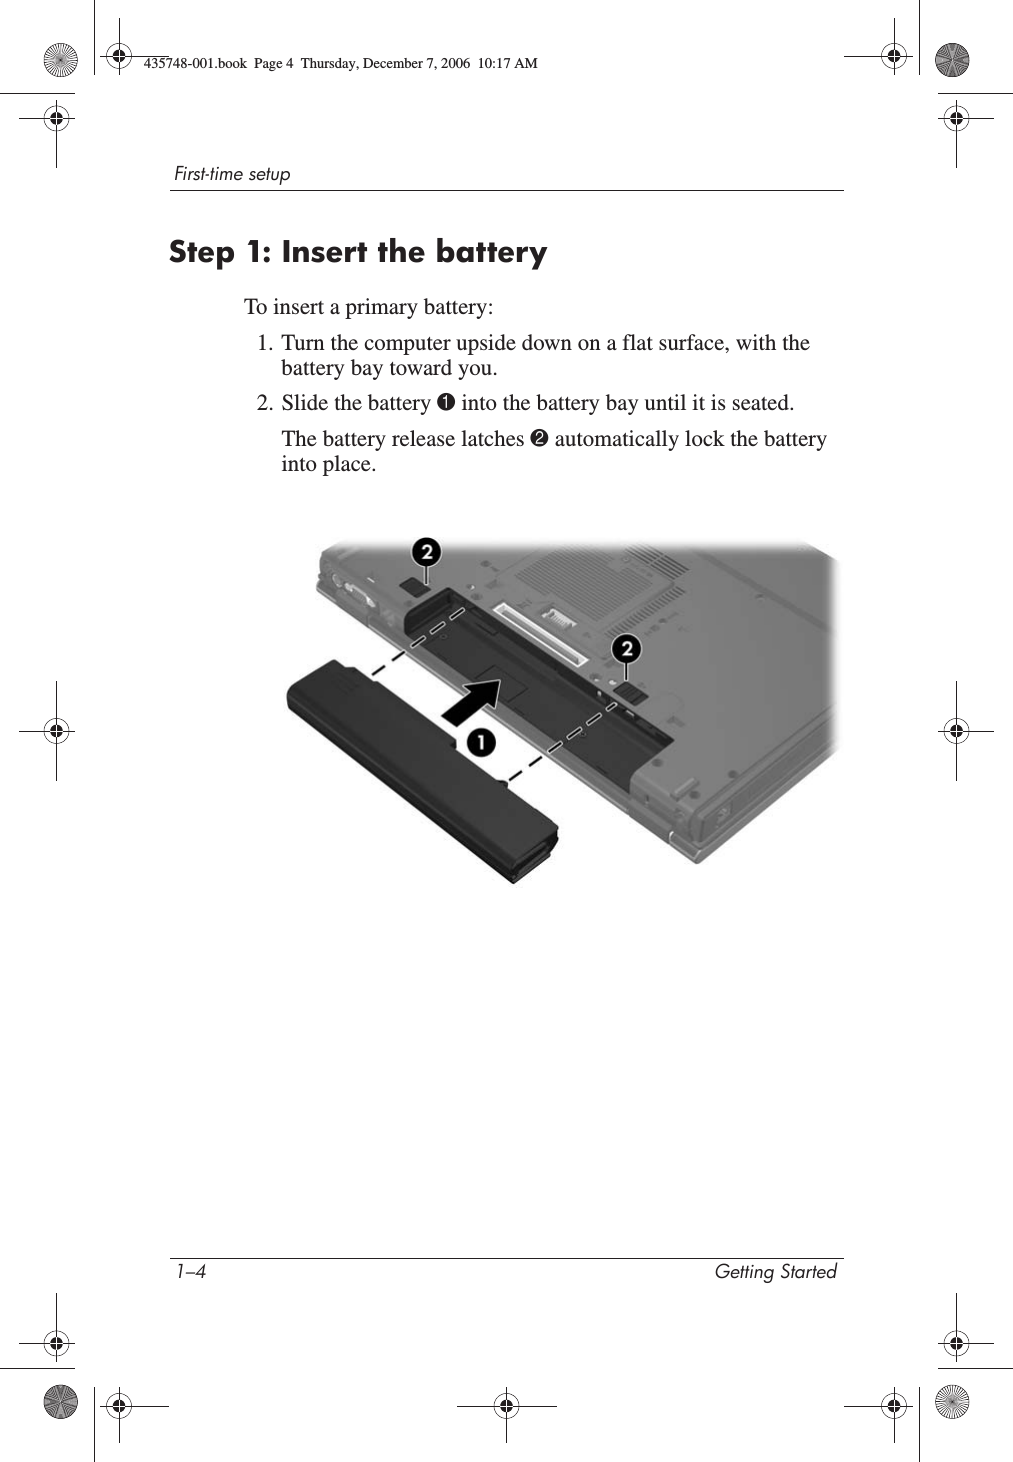 1–4 Getting StartedFirst-time setupStep 1: Insert the batteryTo insert a primary battery:1. Turn the computer upside down on a flat surface, with the battery bay toward you.2. Slide the battery 1 into the battery bay until it is seated.The battery release latches 2 automatically lock the battery into place.435748-001.book  Page 4  Thursday, December 7, 2006  10:17 AM